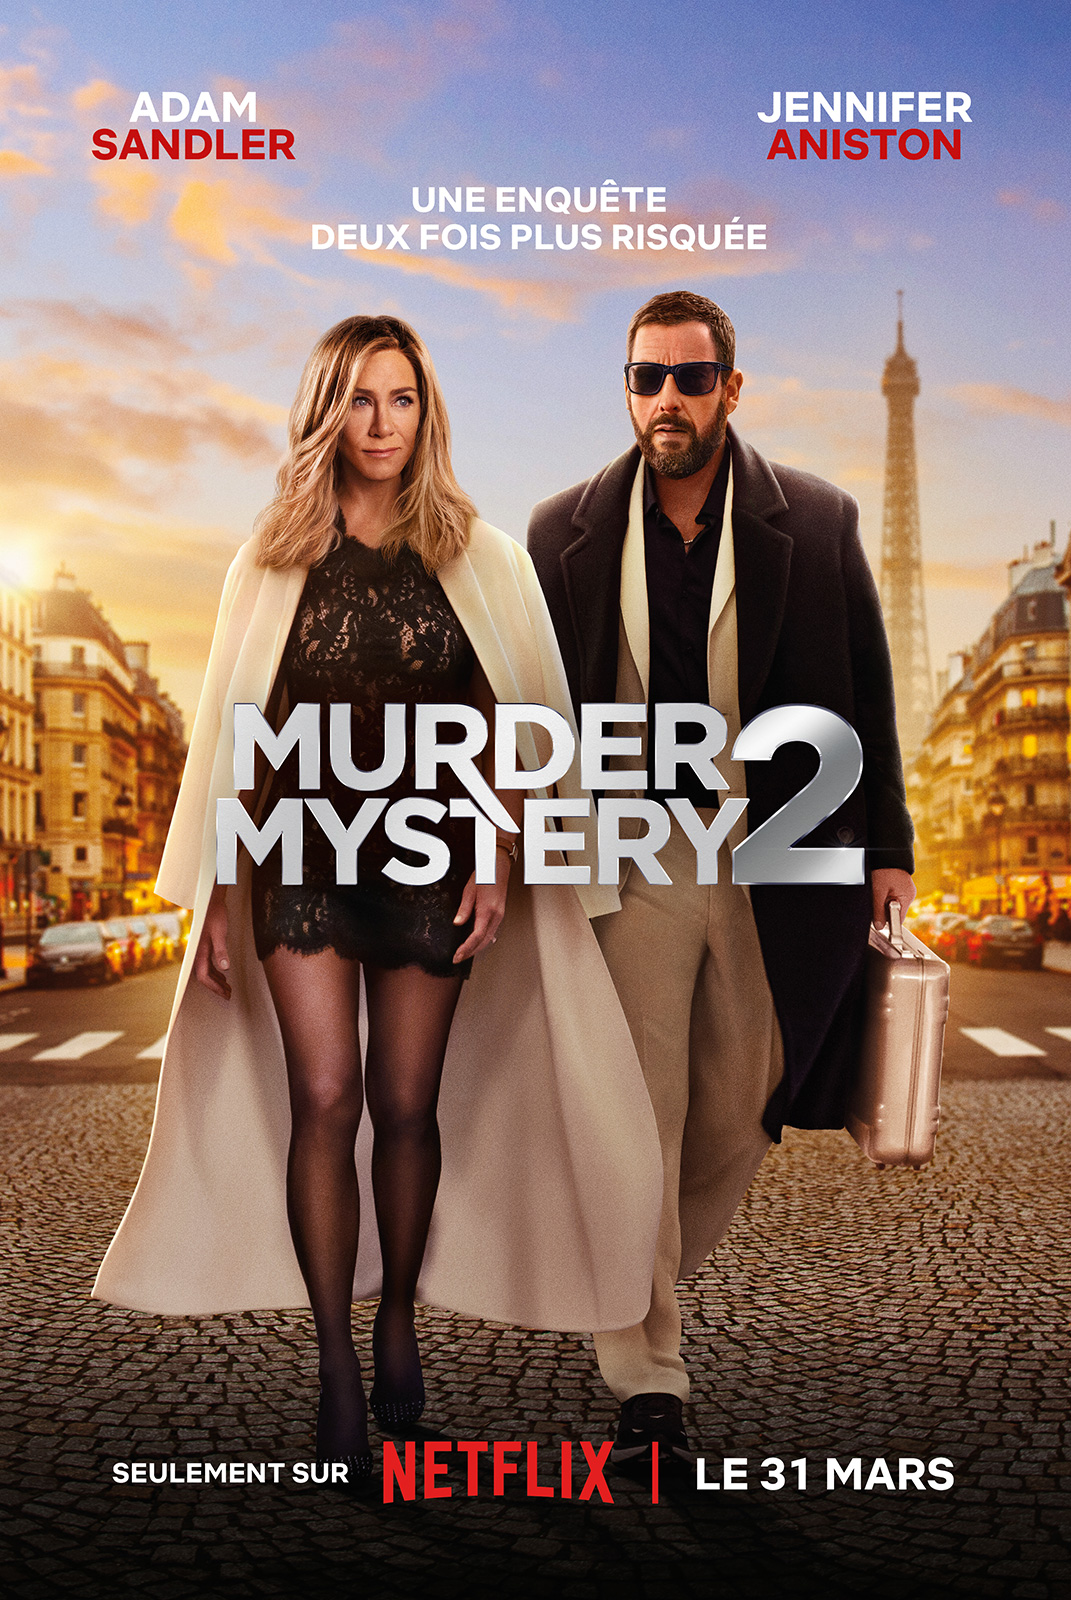 Murder Mystery 2 - film 2023 streaming VF gratuit complet